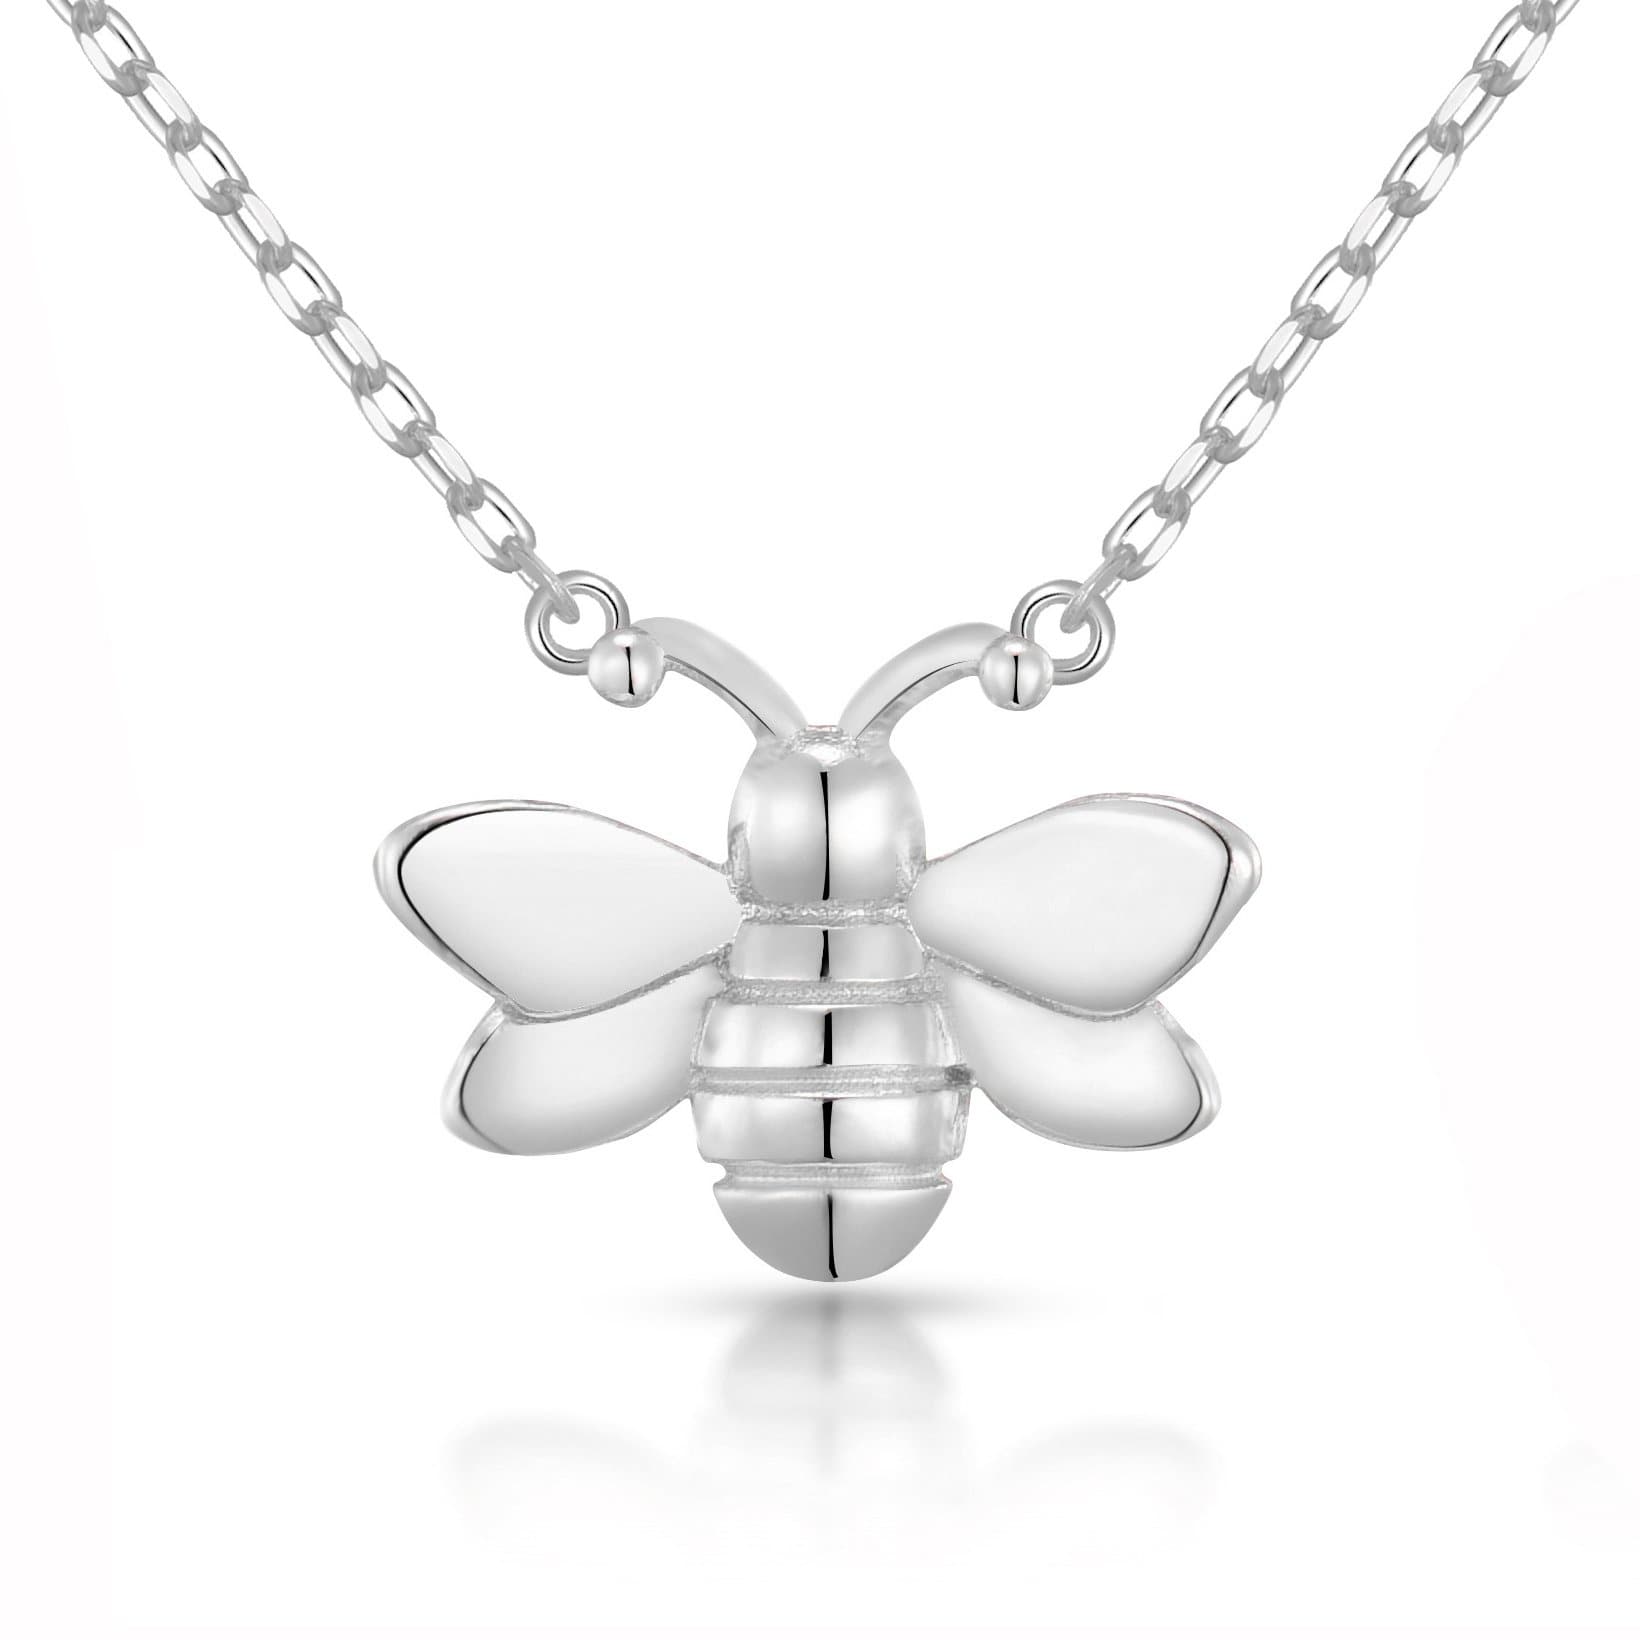 Silver Plated Bumble Bee Necklace